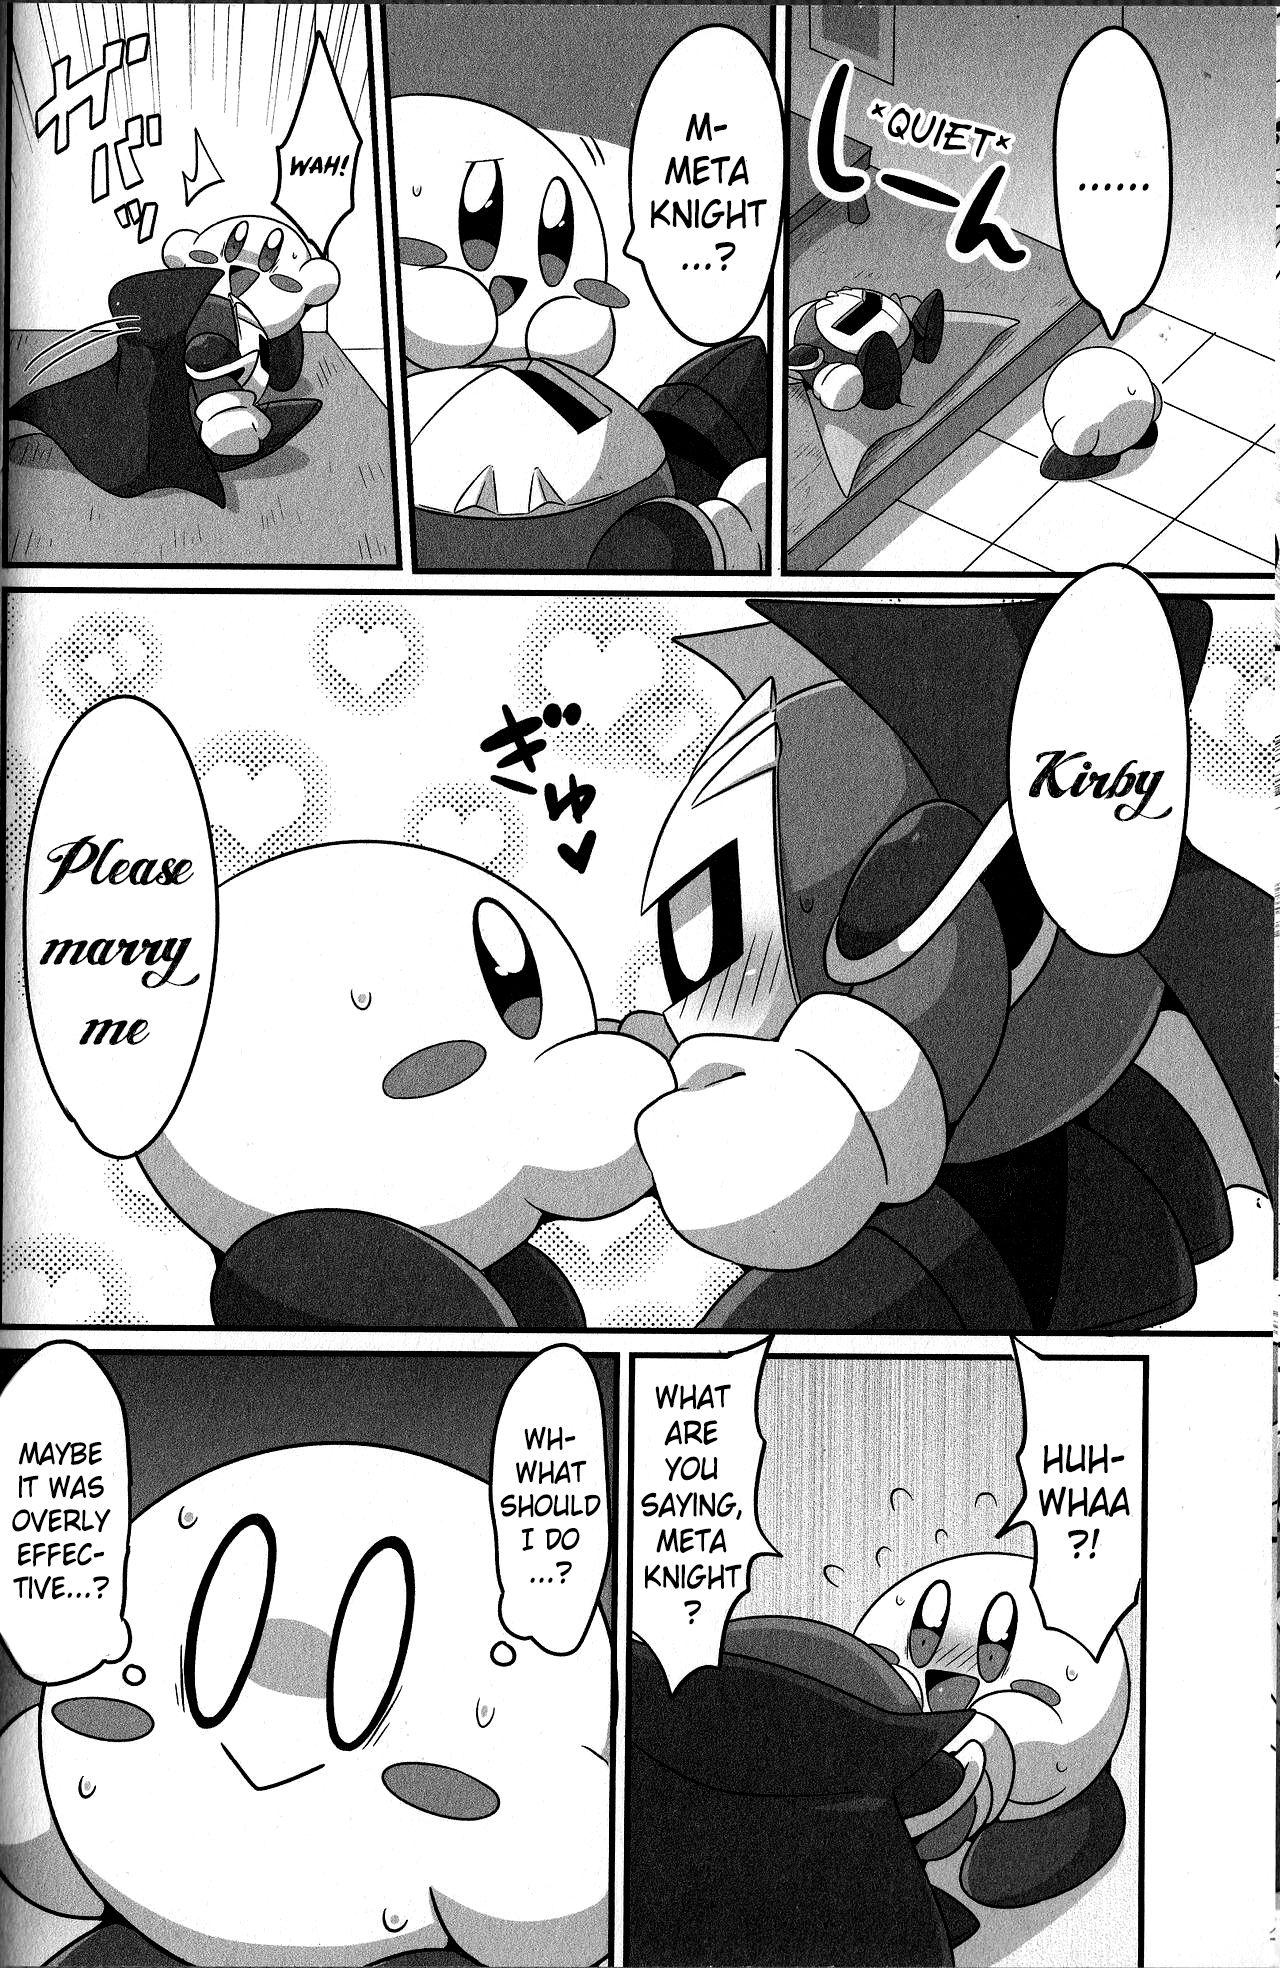 Tiny I Want to Do XXX Even For Spheres! - Kirby Mask - Page 9